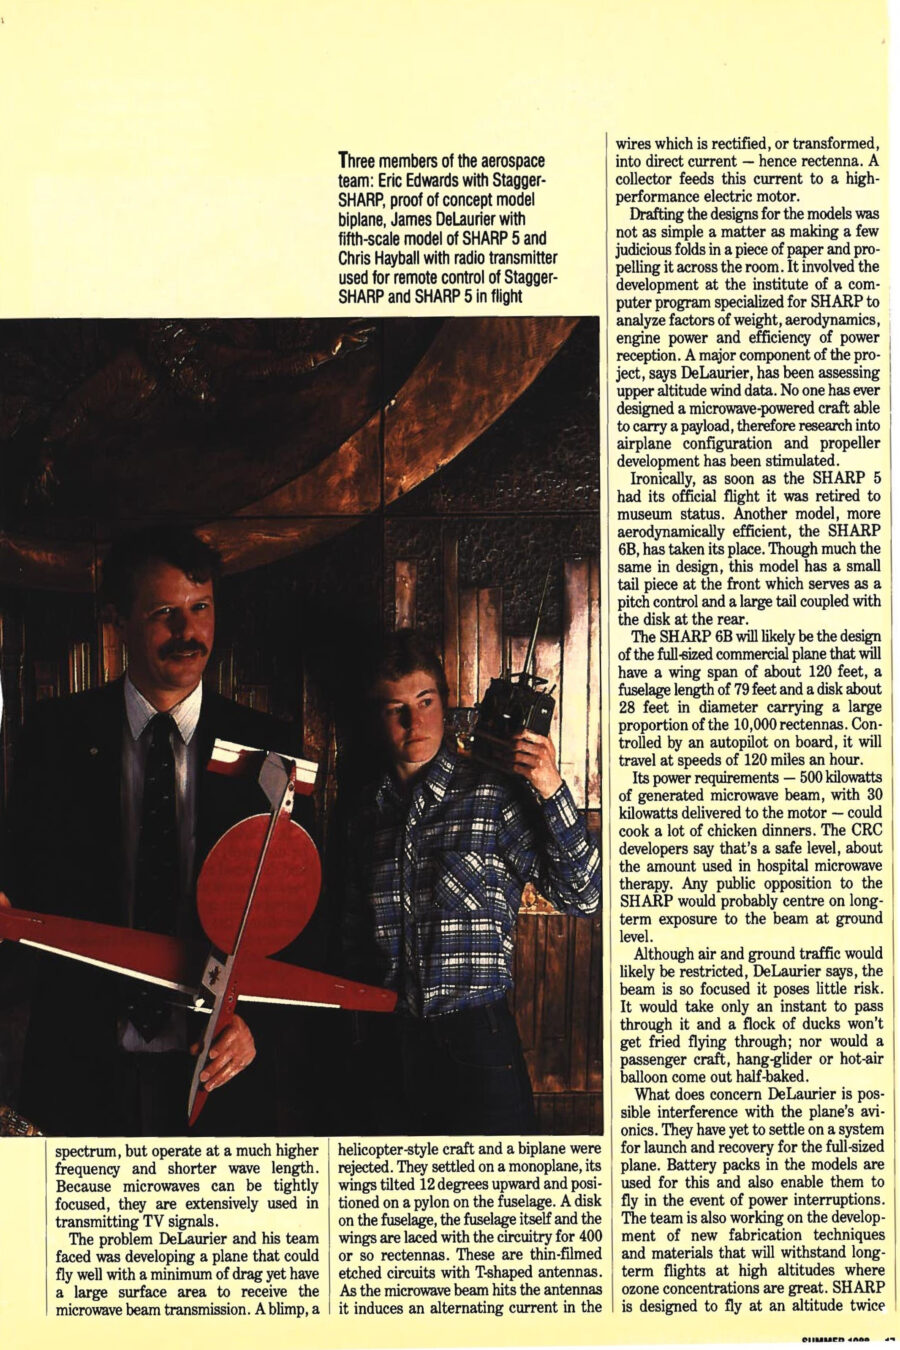 Magazine clipping from University of Toronto Alumni Magazine, Summer, 1988
Headline: Microwave Keeps Aircraft Aloft
Byline: Toba Korenblum
Photo 1: Professor DeLaurier between two students, Eric Edwards, left, and Chris Hayball, right. Edwards holds Stagger-SHARP, a proof of concept model biplane. DeLaurier holds a fifth-scale model of SHARP 5 and Hayball holds a radio transmitter for remote control.
Caption: Three members of the aerospace team: Eric Edwards with Stagger-SHARP, proof of concept model biplane, James DeLaurier with fifth-scale model of SHARP 5 and Chris Hayball with radio transmitter used for remote control of Stagger-SHARP and SHARP 5 in flight.
Photo 2: Balsa wood model plane parts, one prominently painted with a Canadian maple leaf flag, rest on a large structural drawing of the model plane.
Caption: Extra pylon from SHARP 5 and other balsa structures on full-size drawing of SHARP 5 tail assembly.
Photo 3: A close shot of the underside of the plane’s wings, where rectennas have been mounted.
Caption: Rectennas mounted on underside of Stagger-SHARP wings, identical rectennas were mounted on SHARP 5.
Last October, a 10-foot featherweight model of the world’s first microwave-powered aircraft made its inaugural flight. The one-eighth scale prototype is of an ambitious vision: a pilotless plane the size of a Boeing 747, yet the weight of a van, sustained aloft at an altitude of 70,000 feet by a ground-based microwave beam converted to electricity on board. Cheaper than a satellite, more reliable than a manned plane, this aircraft could provide a variety of telecommunications and surveillance services.
“Everything was wrong that day,” Professor James DeLaurier of the Institute for Aerospace Studies, who heads the team that designed the aircraft, remembers. “The flying conditions were horrible. There were telephone wires. The field was abysmal, soggy. I had a bad cold and was feeling worse by the minute.” The plane, battery-powered on takeoff, struggled to a 300-foot altitude where it intercepted a 10-kilowatt microwave beam from a 15-foot-wide parabolic dish tracking its path. On board, the energy was transformed into 150 watts of direct current for the plane’s electric motor. For three and a half minutes, the model battled high gusts, swerved, flew in tight circles above the power source, surviving near stalls.
DeLaurier flew in a Piper Cub at age three, while in high school he’d while away his time sketching planes and airfoils, then rush home to make the plans into balsa models. He graduated from the University of Illinois and Standford and worked in American industry as a designer of scientific balloons and research analyst. He came to the University of Toronto in 1974, and is still designing. The model that made the flight is one in a series DeLaurier and a group of graduate students have designed, built and tested since 1981. SHARP 5 (Stationary High Altitude Relay Platform) was constructed for the federal Communications Research Centre, where the microwave technology used to power the SHARP was developed.
The SHARP 5 first flew on microwave power in September last year for 20 minutes. The second flight was for the future of the future of the project, to secure funding. The Natural Sciences and Engineering Research Council awarded a $500,000 strategic grant to fund the project for another three years. With this grant, DeLaurier and his team are planning two quarter-scale models, to be up and flying within the next three years. Graduate student Eric Edwards will be working on the flight control system. Chris Hayball, who specializes in flight dynamics, is the project’s engineer. The CRC is looking for funding for a half-scale model.
The SHARP’s lightweight airframe construction and materials bear close resemblance to DeLaurier’s childhood model planes. DeLaurier says, “We have a joke here that if you can’t cut balsa, don’t apply.” Canadians have succeeded where their better-funded competitors at Lockheed and NASA haven’t because of their ability to step away from complicated numerical computations, roll up their sleeves and tinker. Testing in the institute’s wind tunnel and model demonstrations proved the concept could work. With that they were able to build on the American utilization of microwaves. Microwaves, like radio waves, are forms of energy on the electromagnetic spectrum, but operate at a much higher frequency and shorter wave length. The challenge was developing a plane that could fly well with minimum drag yet have a large surface area to receive the microwave beam transmission. A blimp, a helicopter-style craft and biplane were rejected. They settled on a monoplane, its wings wilted 12 degrees upward and positioned on a pylon on the fuselage. The entire plane is laced with the circuitry for 400 rectennas, or thin-filmed etched circuits with T-shaped antennas. The microwave beam hits the antennas and induces an alternating current which is transformed into direct current and fed to a high-performance electric motor.
Development still involved writing a computer program to analyze factors of weight, aerodynamics, engine power and efficiency of power reception. Upper altitude wind data had to be assessed. Ironically, as soon as SHARP 5 had its official flight, it was retired. The more aerodynamically efficient SHARP 6B took its place. The SHARP 6B will likely be the design of the full-sized commercial plane, with a wing span of about 120 feet, a fuselage length of 79 feet and a disk about 28 feet in diameter carrying a large proportion of the 10,000 rectennas. Controlled by an autopilot on board, it will travel at speeds of 120 miles an hour.
The plane would require 500 kilowatts of generated microwave beam, with 30 kilowatts delivered to the motor. The CRC developers say the level is safe, about the amount used in hospital microwave therapy. DeLaurier says the beam is so focused it poses little risk. Birds would pass through it in an instant, unharmed. Launch and recovery systems still have to be worked out. Battery packs supply power in the models.
SHARP is designed to fly at an altitude twice as high as most passenger planes, under less atmospheric pressure, using less power at a lower cost. SHARP could be built to provide 10 kilowatts to power the communications payload. As a comparison, the European space Agency’s Olympus satellite will generate only 3 kilowatts of power after launch. That satellite cost $500 million just to build. The commercialized SHARP would cost about $20 million, some $1 to $2 million for the plane, the rest for a dozen or so microwave transmitters. Yearly operating costs are expected to be $250,000 or so. The development of the first operational model with its array of transmitters would cost about $30 million. The result would be a “poor man’s satellite” covering smaller areas, about 375 miles in diameter. A network of SHARPs could economically provide true regional broadcasting capability, especially in mountainous or remote areas of Canada, or in smaller countries. Other uses could include monitoring acid rain and carbon dioxide concentrations, conducting geological or agricultural surveys, or carrying radar sensing equipment for search and rescue over coastal waters. The military has expressed interest in a network of SHARPs functioning as an early warning system for low-flying missiles.
Nippon Tel, the Japanese telephone company, has already expressed interest in the fledgling SHARP technology. DeLaurier is confidant it can be built and succeed here in Canada. “If the SHARP literally takes off and becomes a viable technology then the event will be treated with the same significance as Goddard’s first attempt with the liquid fuel rocket out in a back field in New England,” says DeLaurier. “If it turns out to be a dead end it’ll have some historical significance, but it will be, unfortunately, a footnote.” Regardless, DeLaurier retains his childhood infatuation with the wonder of flight.